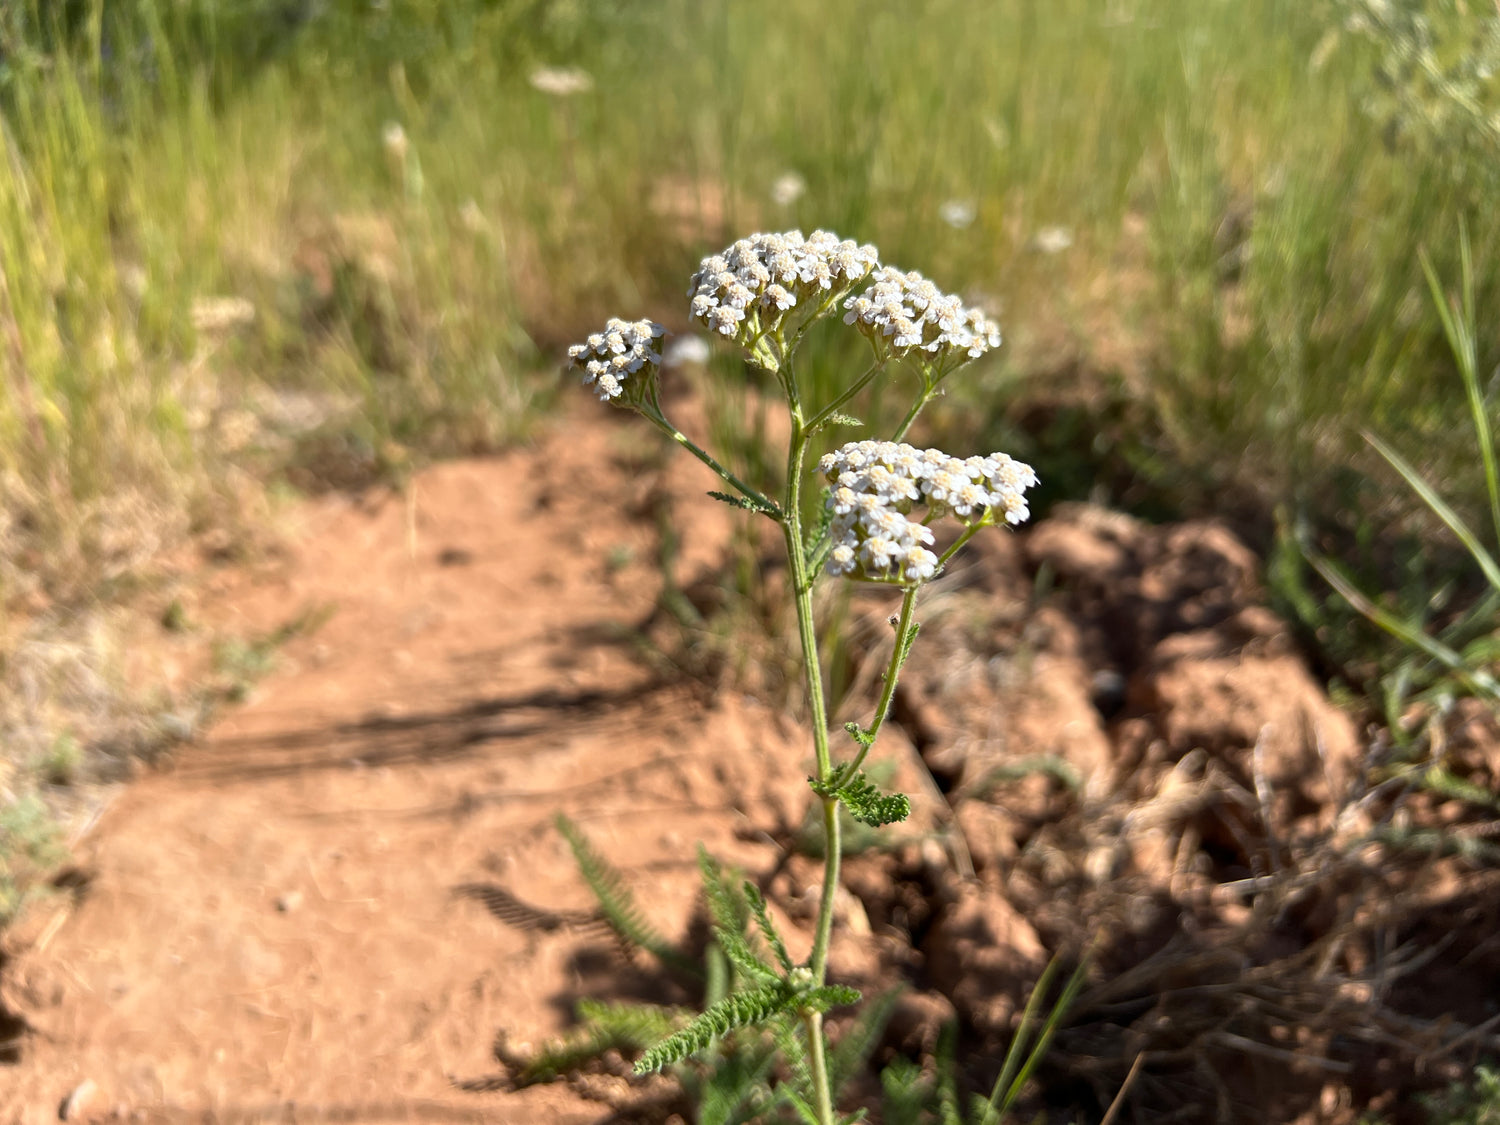 Vibrant image of Yarrow flowers blooming at Sacred Plant Co's Low Water Regenerative Colorado Farm, celebrated for sustainable farming practices.